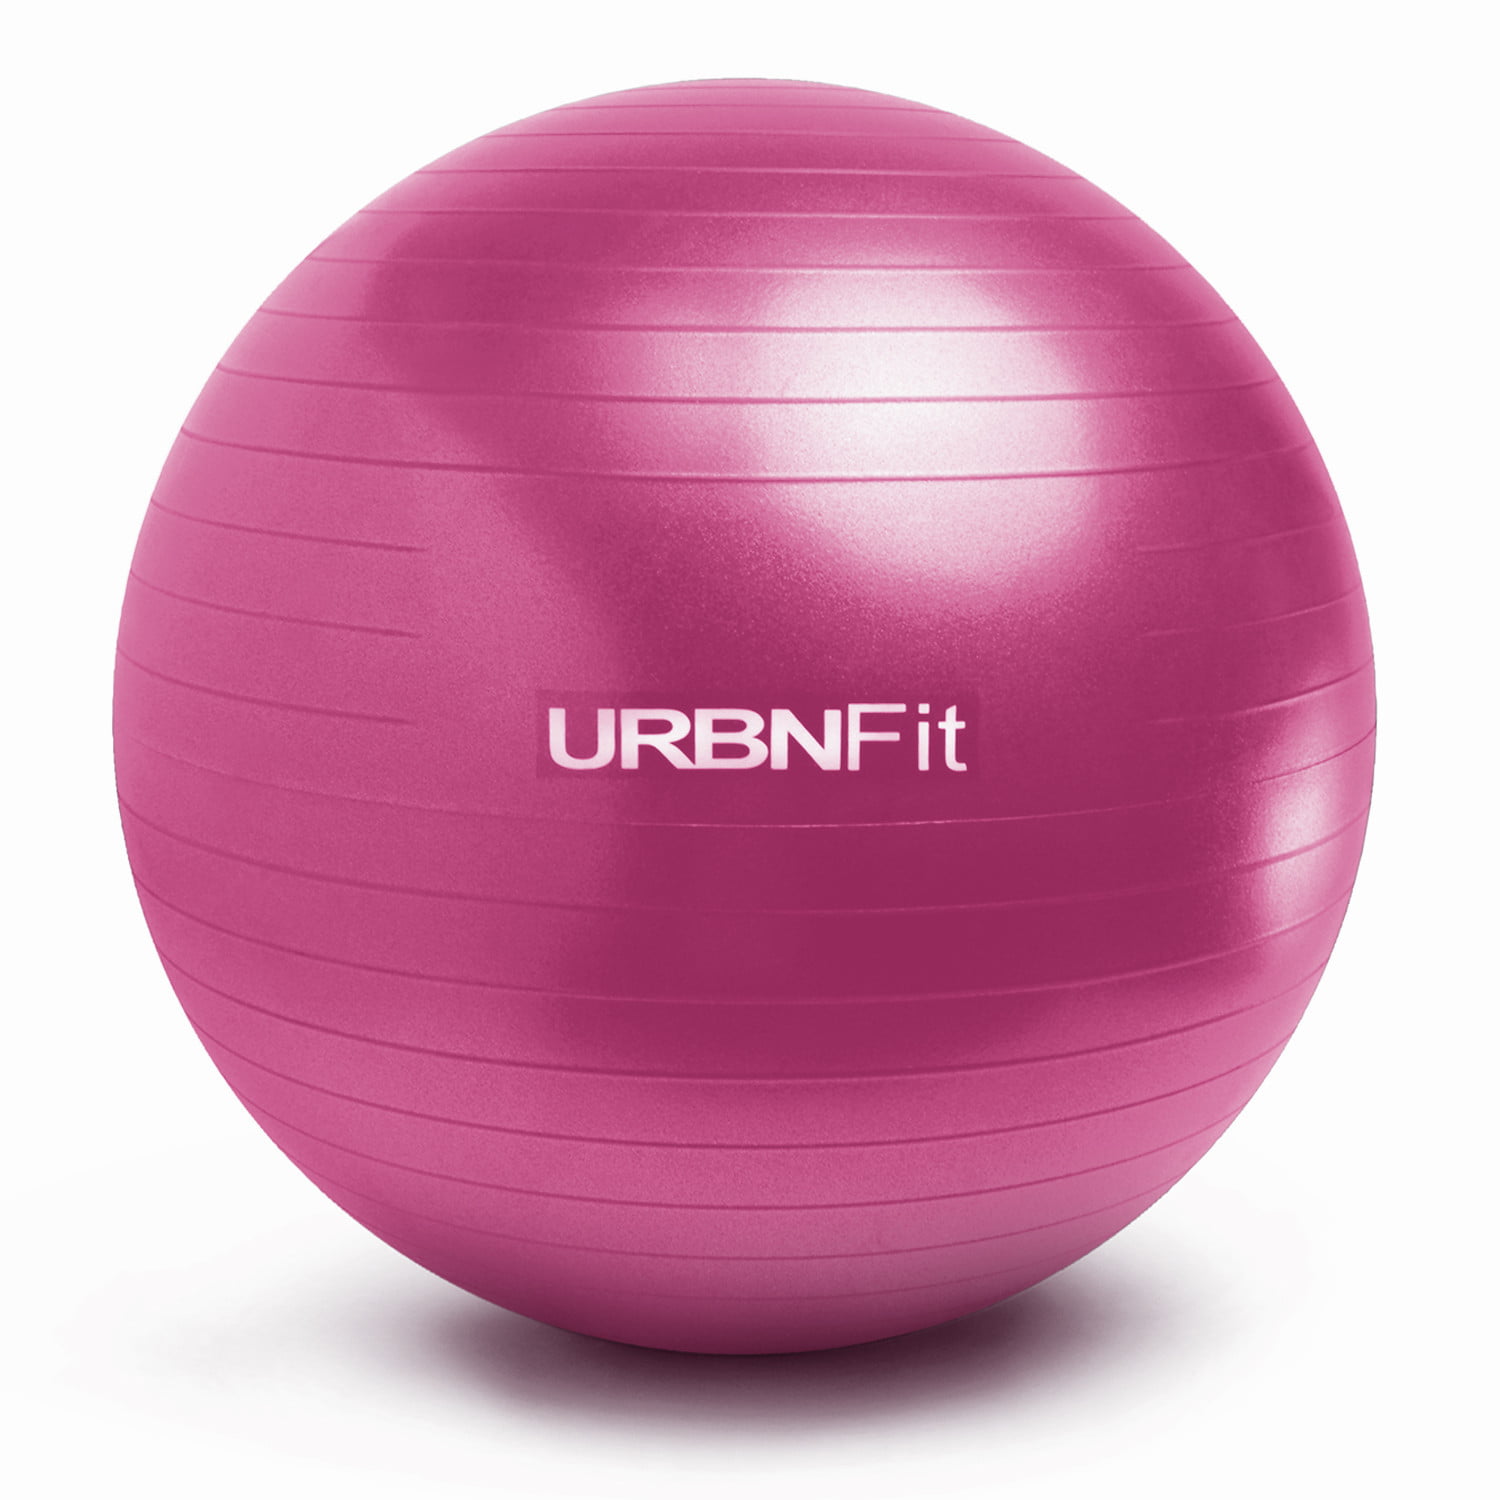 Exercise Balls For Fitness, Stability & Yoga - Workout Guide Included ...